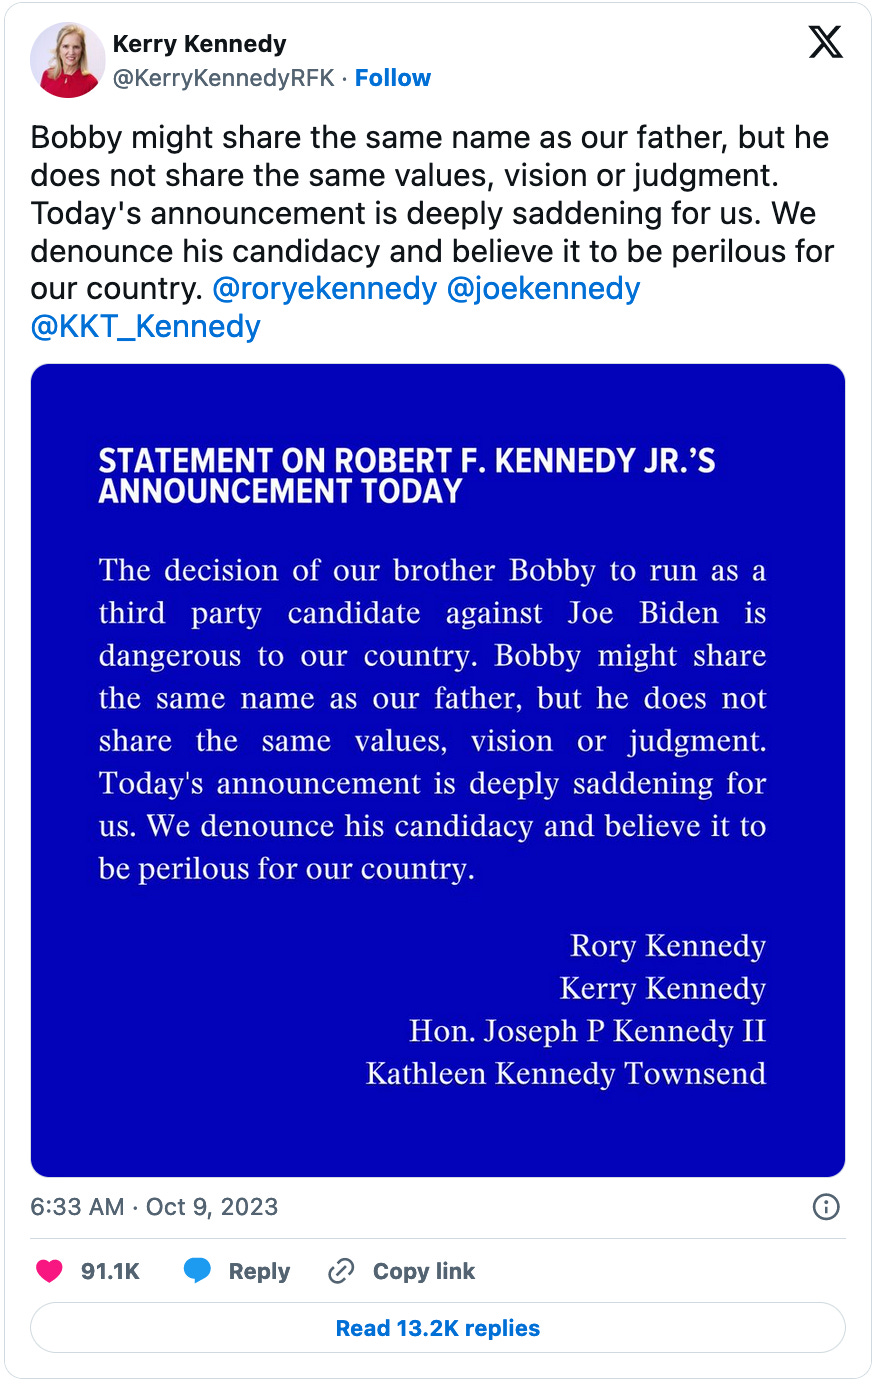 October 9, 2023 tweet from Kerry Kennedy containing a statement from her, Rory Kennedy, Joseph P. Kennedy II, and Kathleen Kennedy Townsend reading, "Bobby might share the same name as our father, but he does not share the same values, vision or judgment. Today's announcement is deeply saddening for us. We denounce his candidacy and believe it to be perilous for our country."